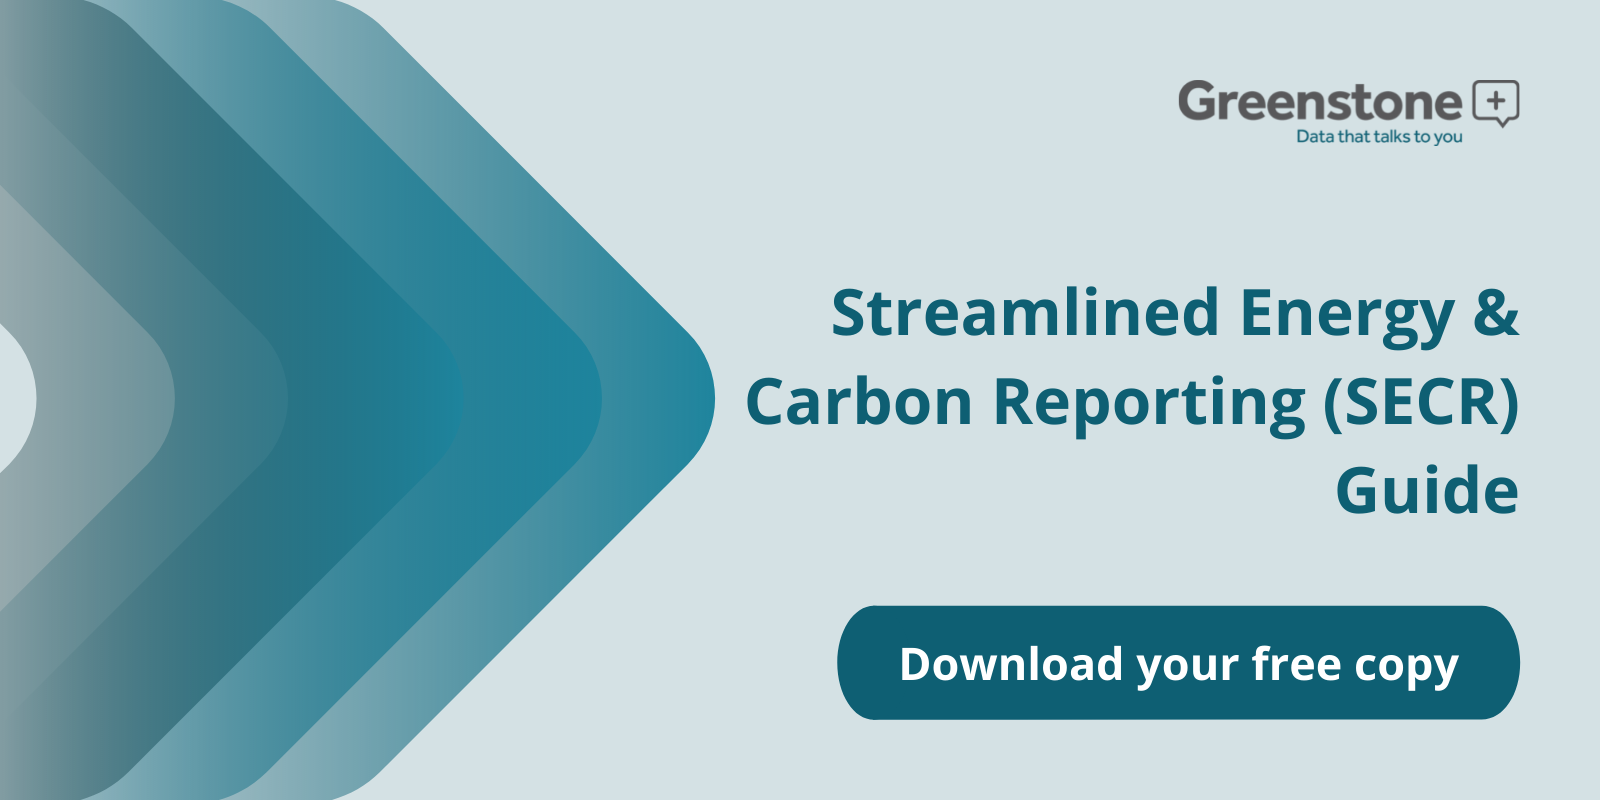 Streamlined Energy & Carbon Reporting (SECR) Guide